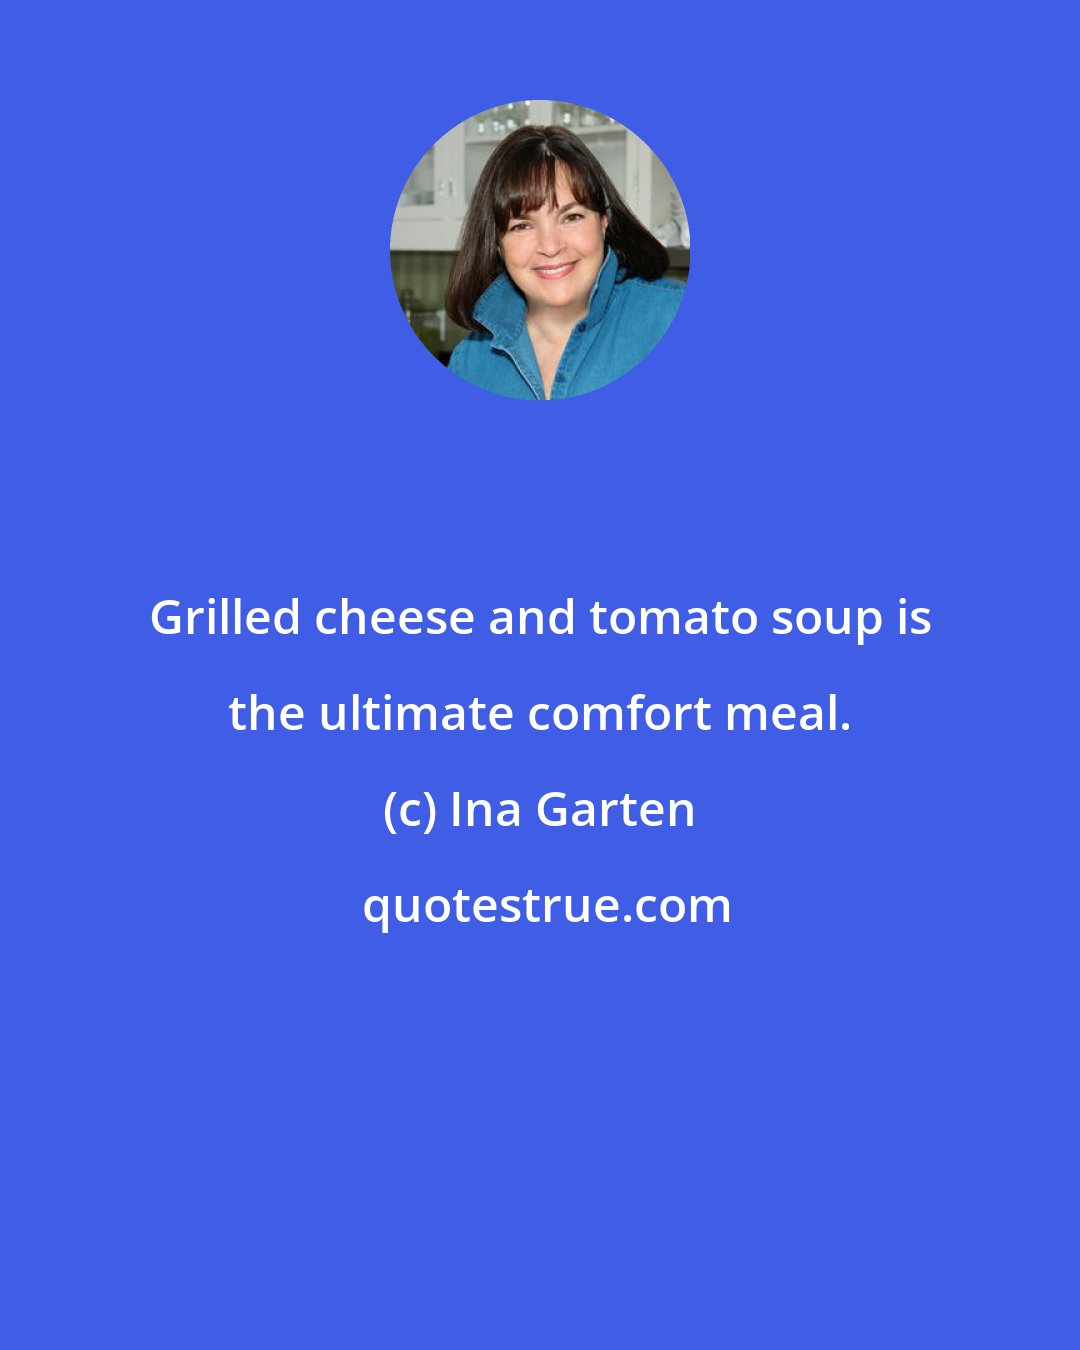 Ina Garten: Grilled cheese and tomato soup is the ultimate comfort meal.